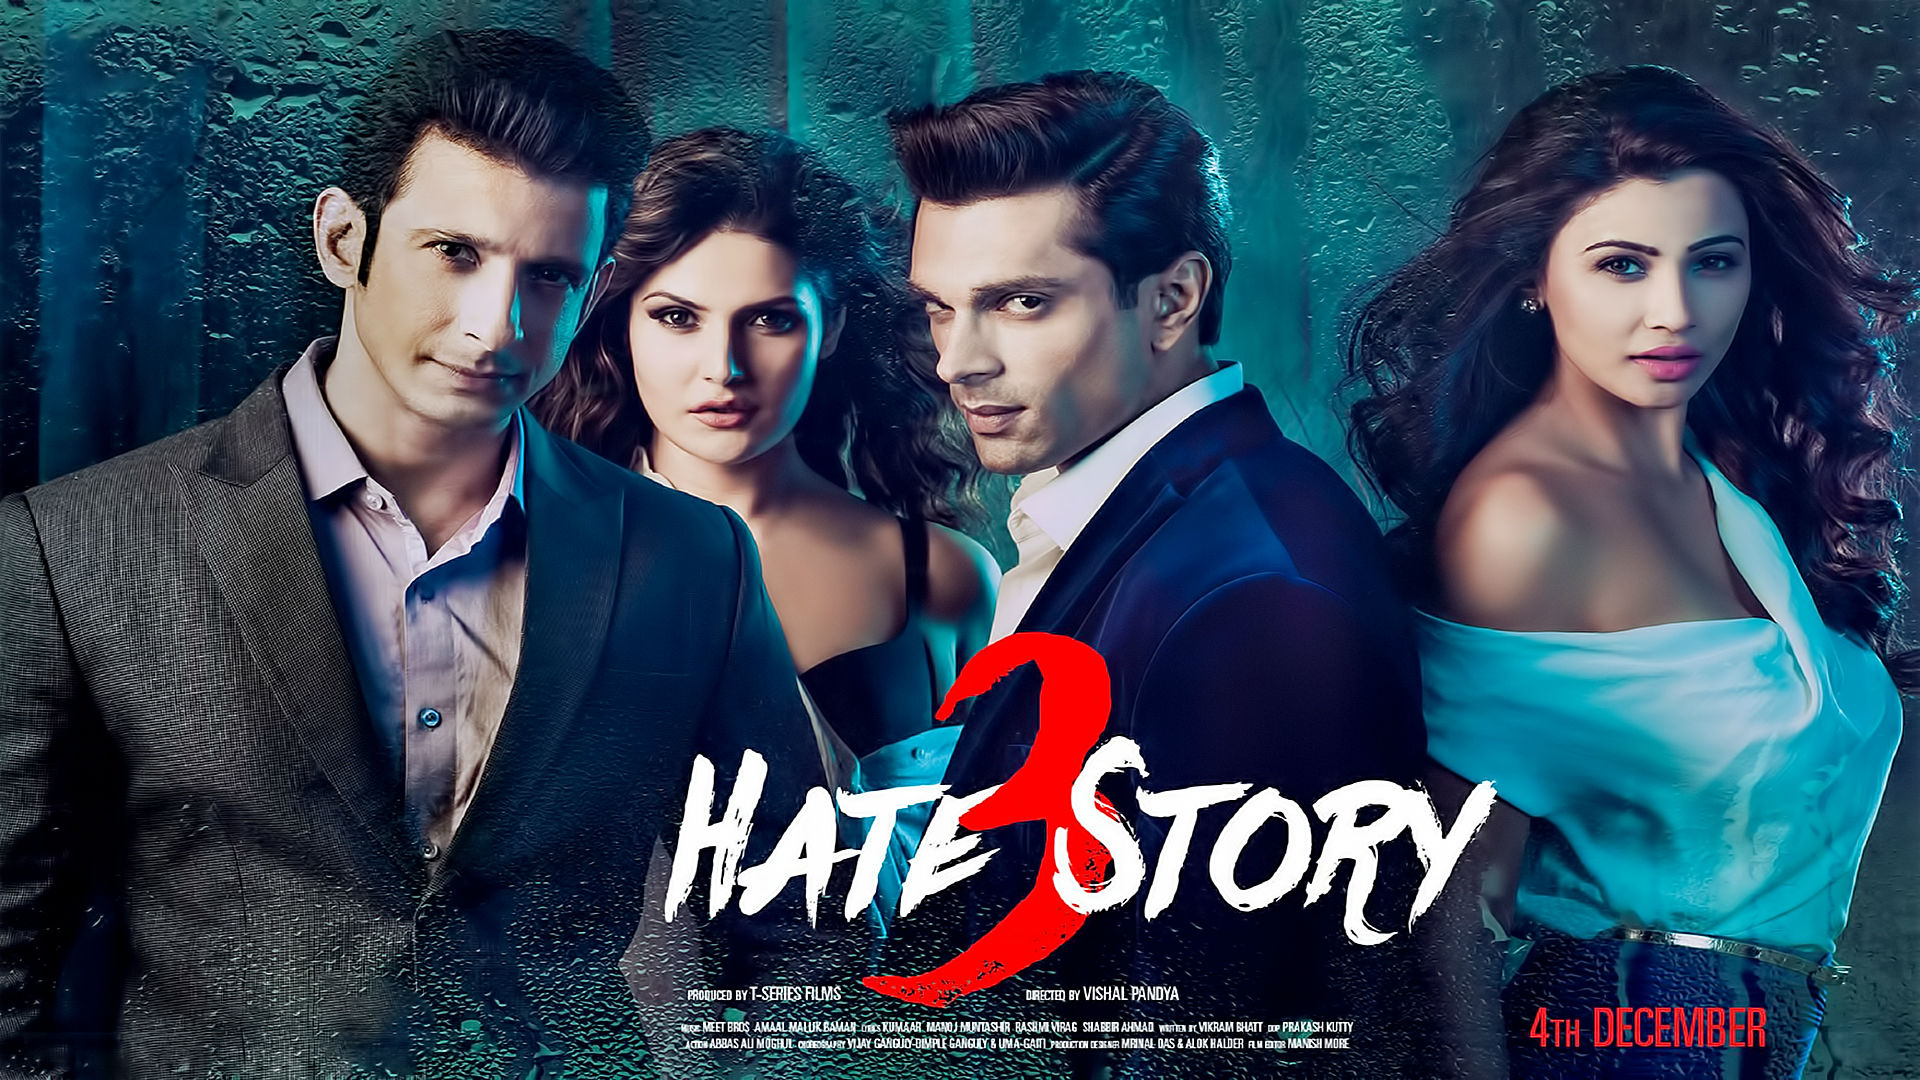 Hate Story 3 (2015) - DVD PLANET STORE